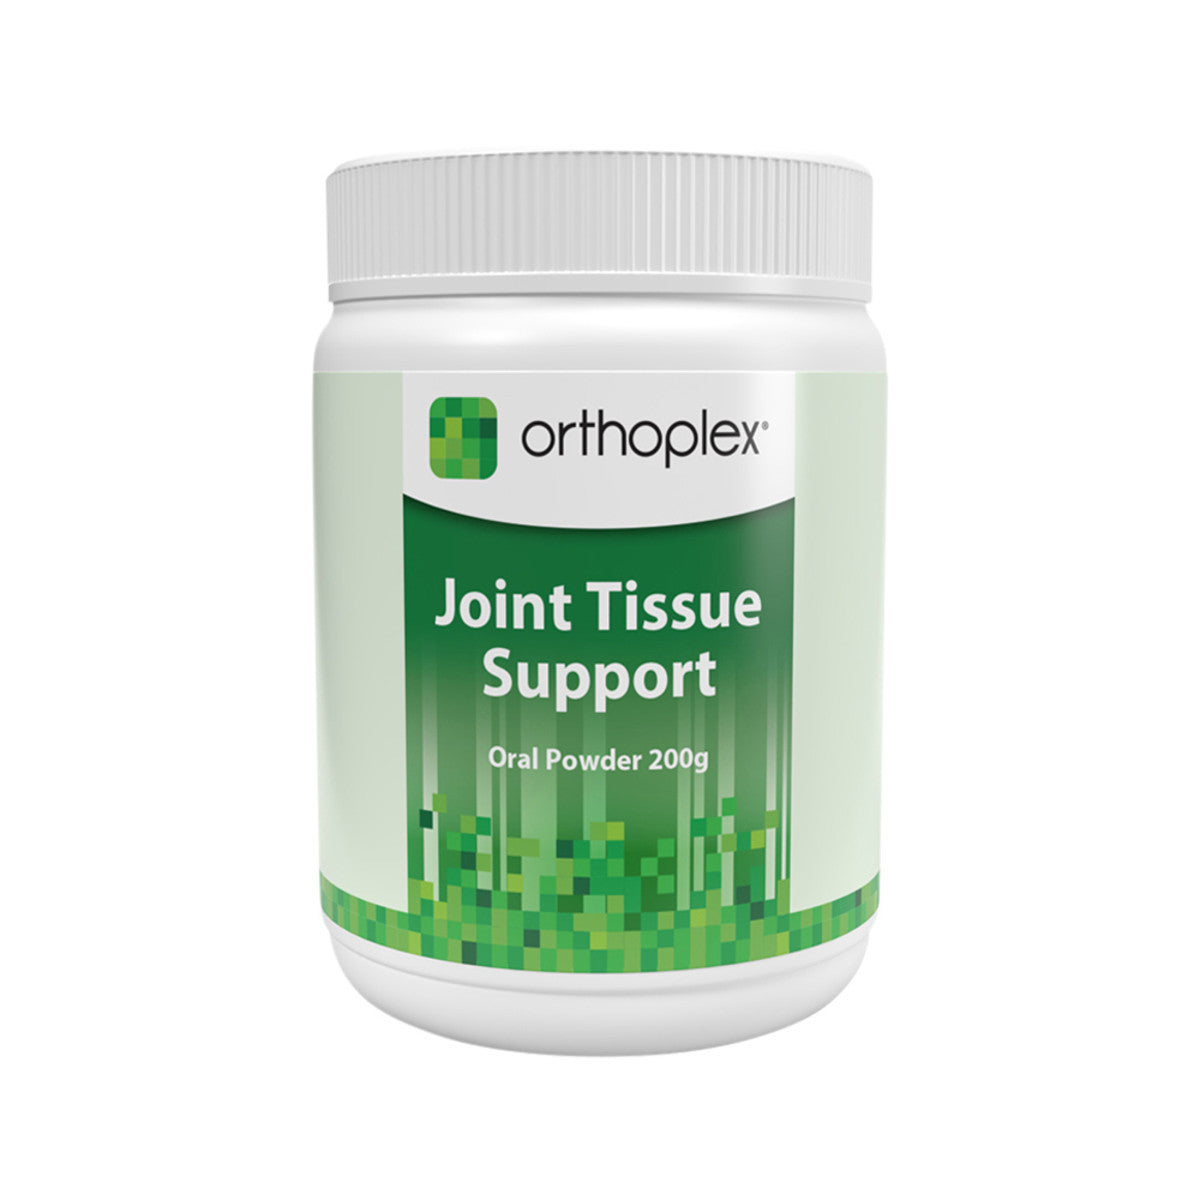 Orthoplex - Joint Tissue Support